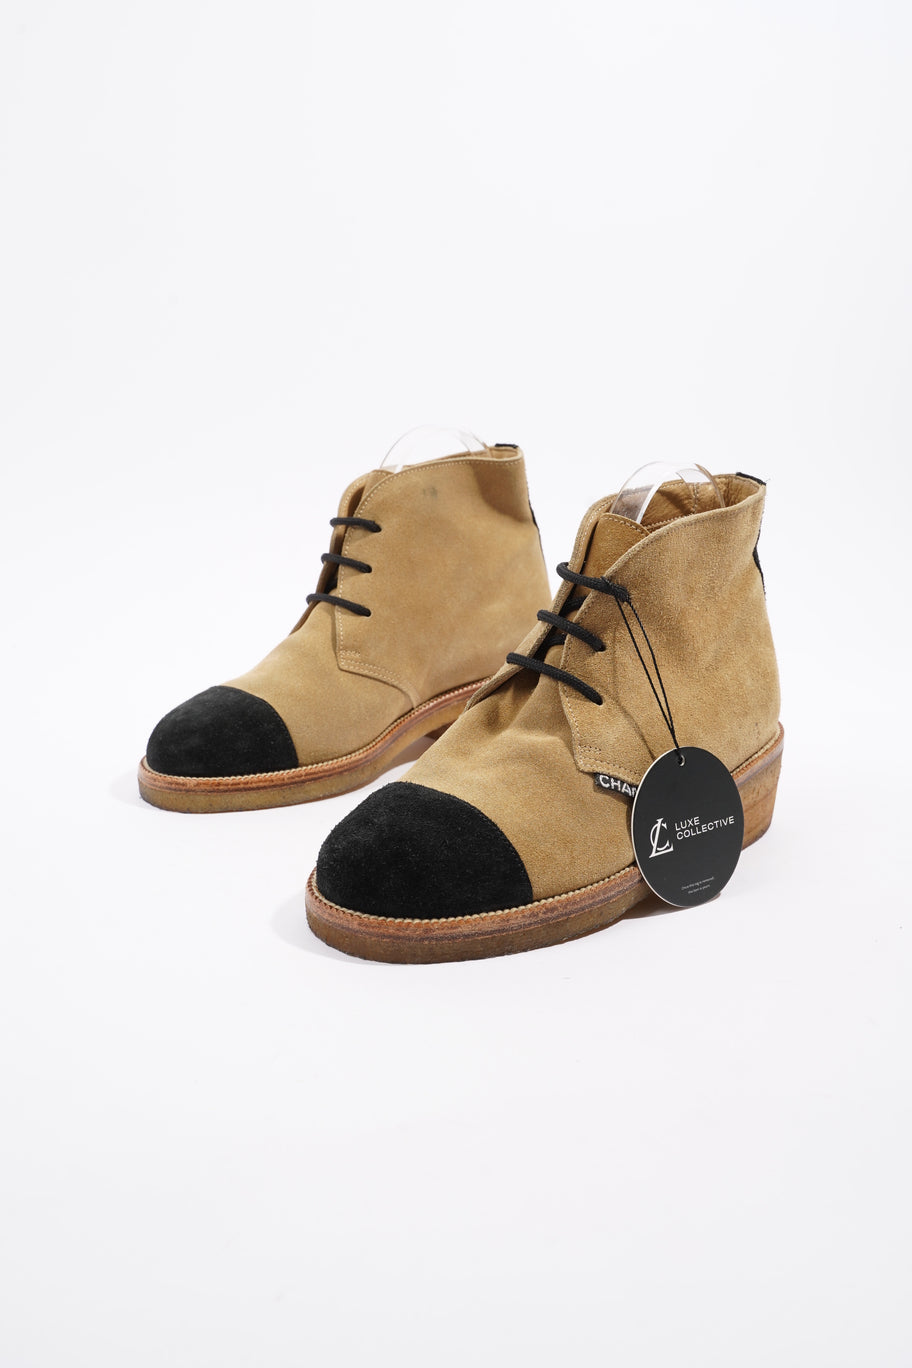 Ankle Boot Beige Suede EU 37 UK 4 Image 12